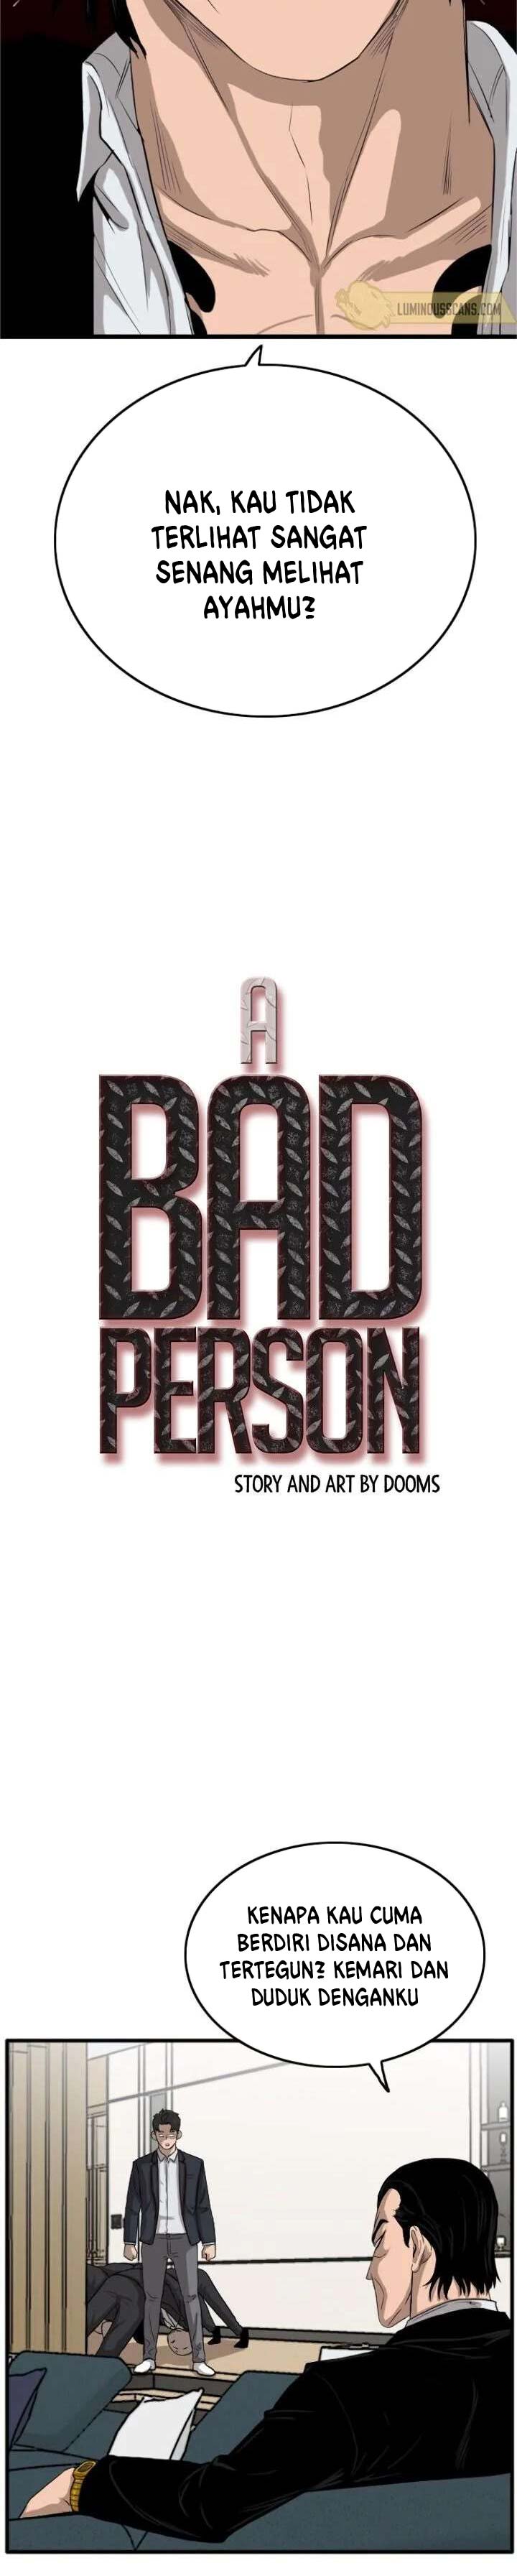 A Bad Person Chapter 12 3